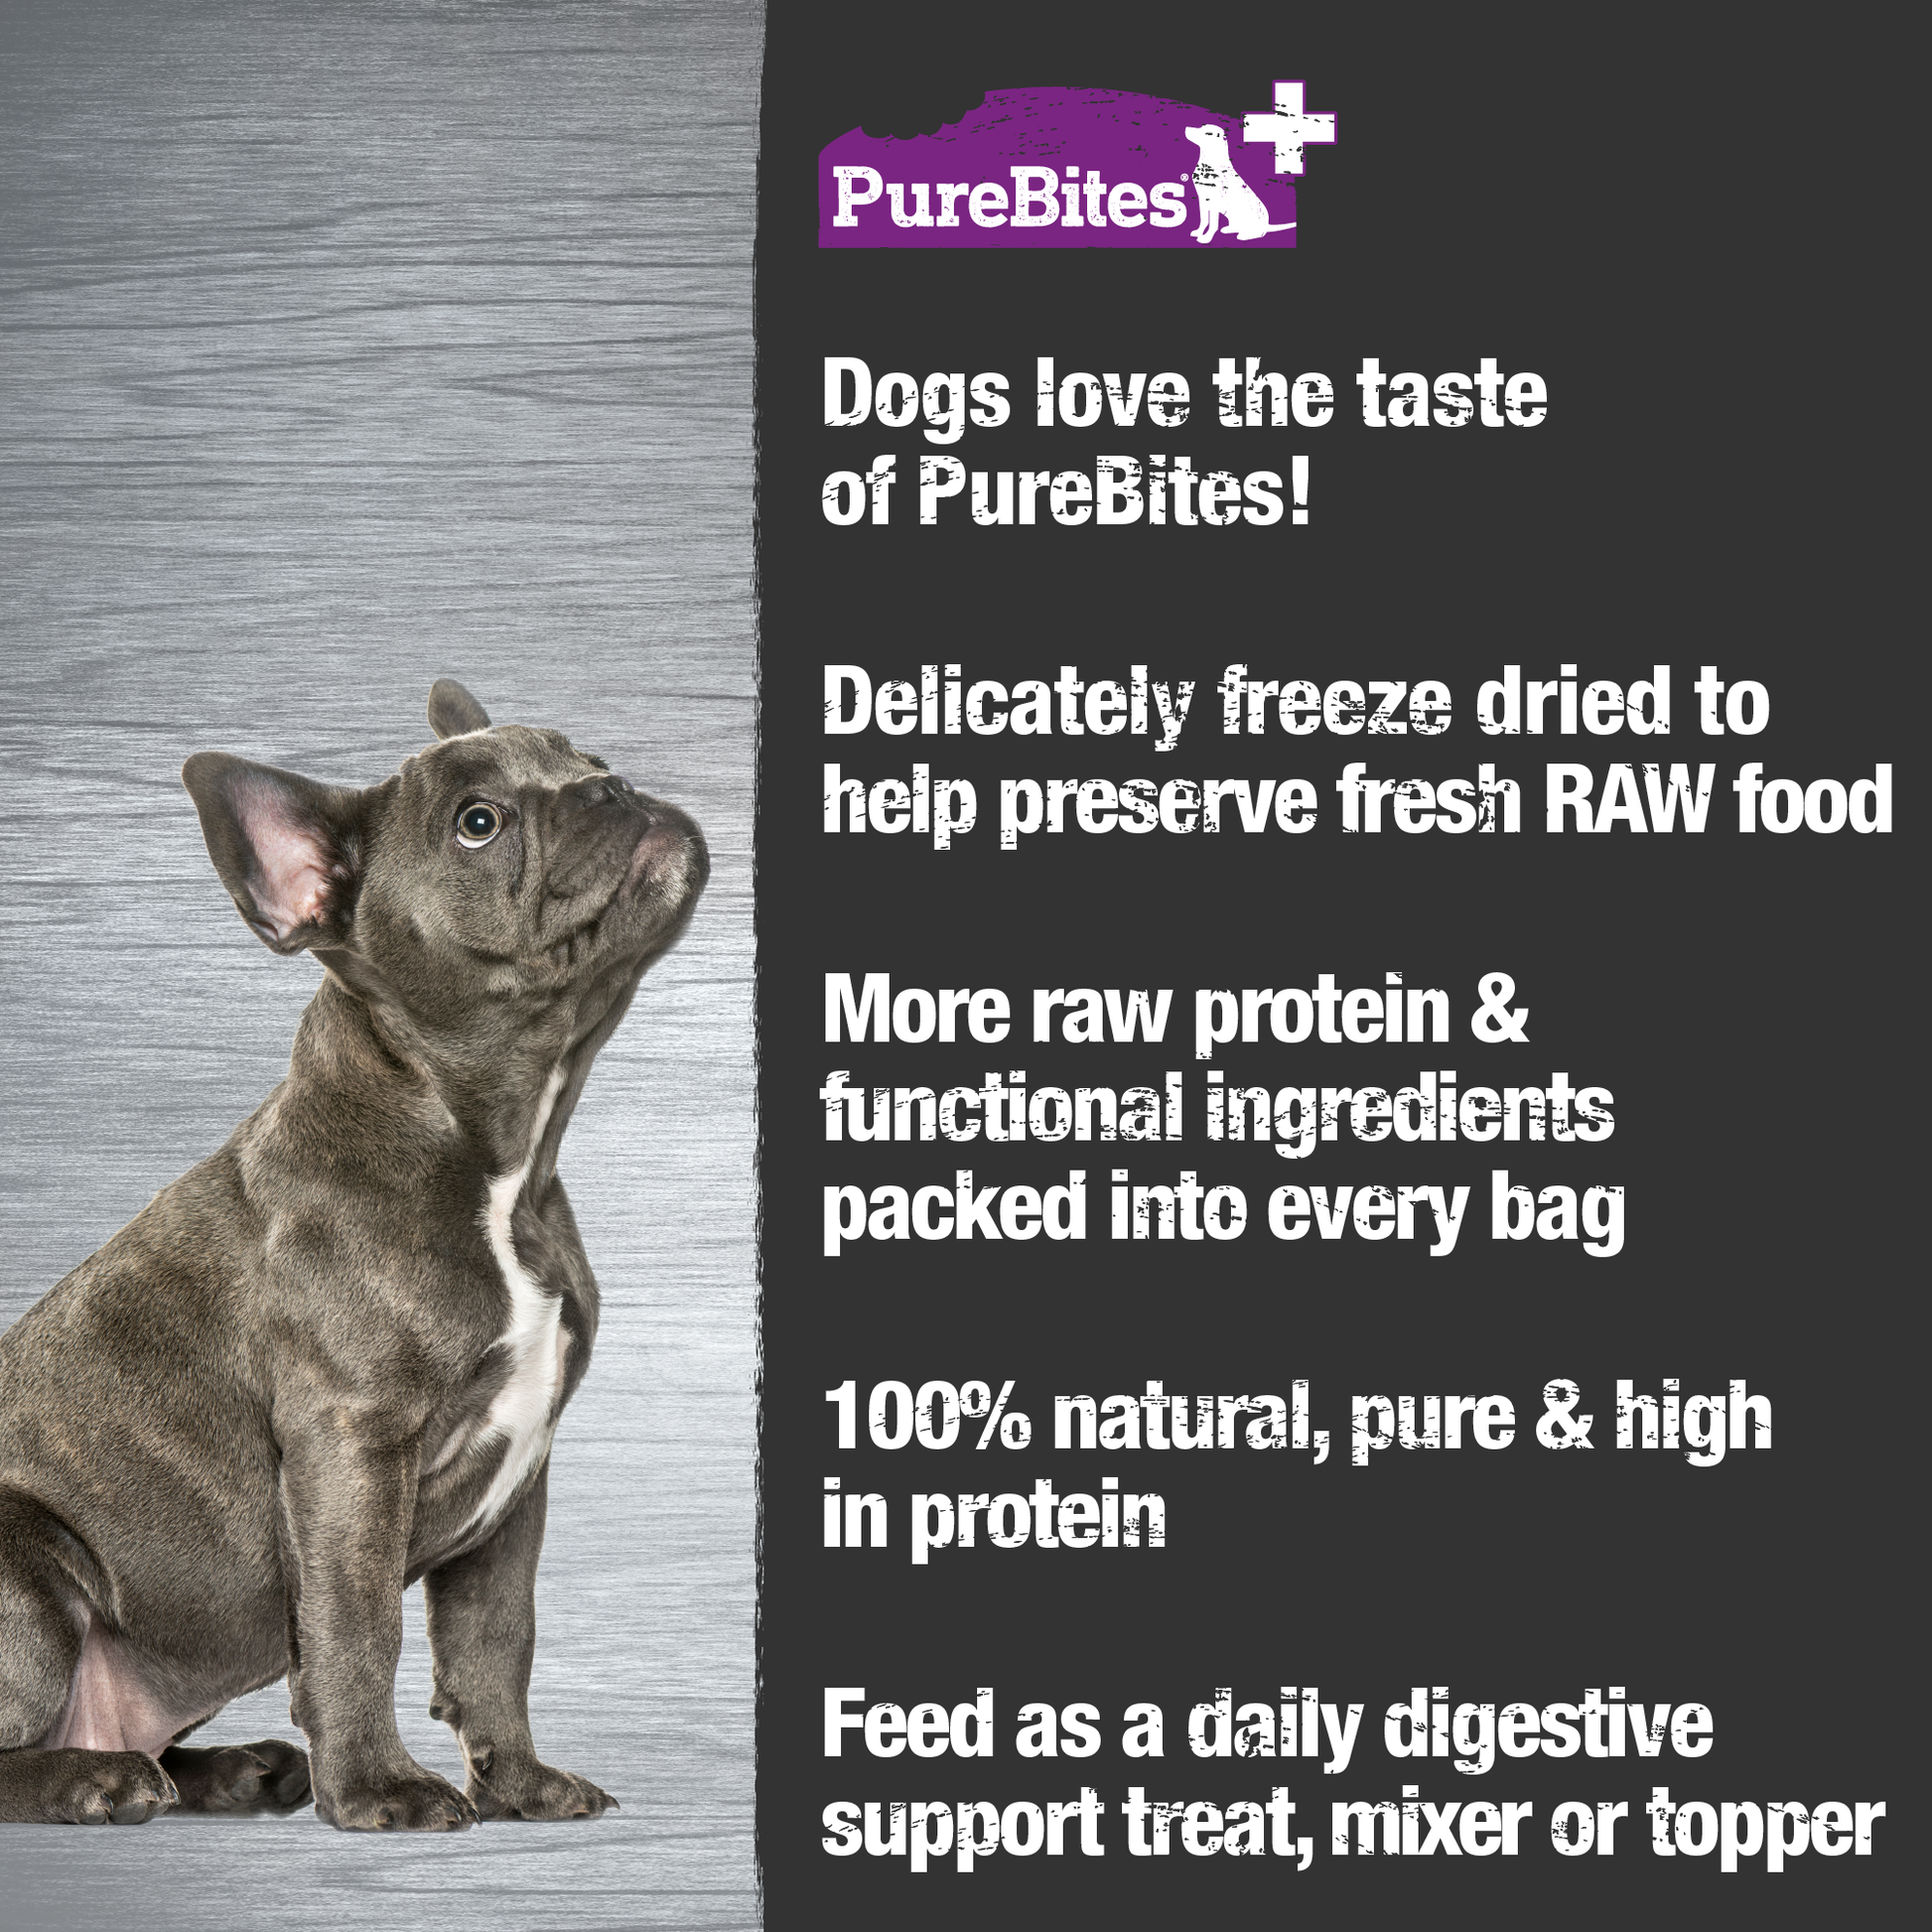 Made fresh & pure means more RAW protein and nutrients packed into every bag. Our gut & digestion treats are freeze dried to help preserve its RAW taste, and nutrition, and mirror a dog’s ancestral diet